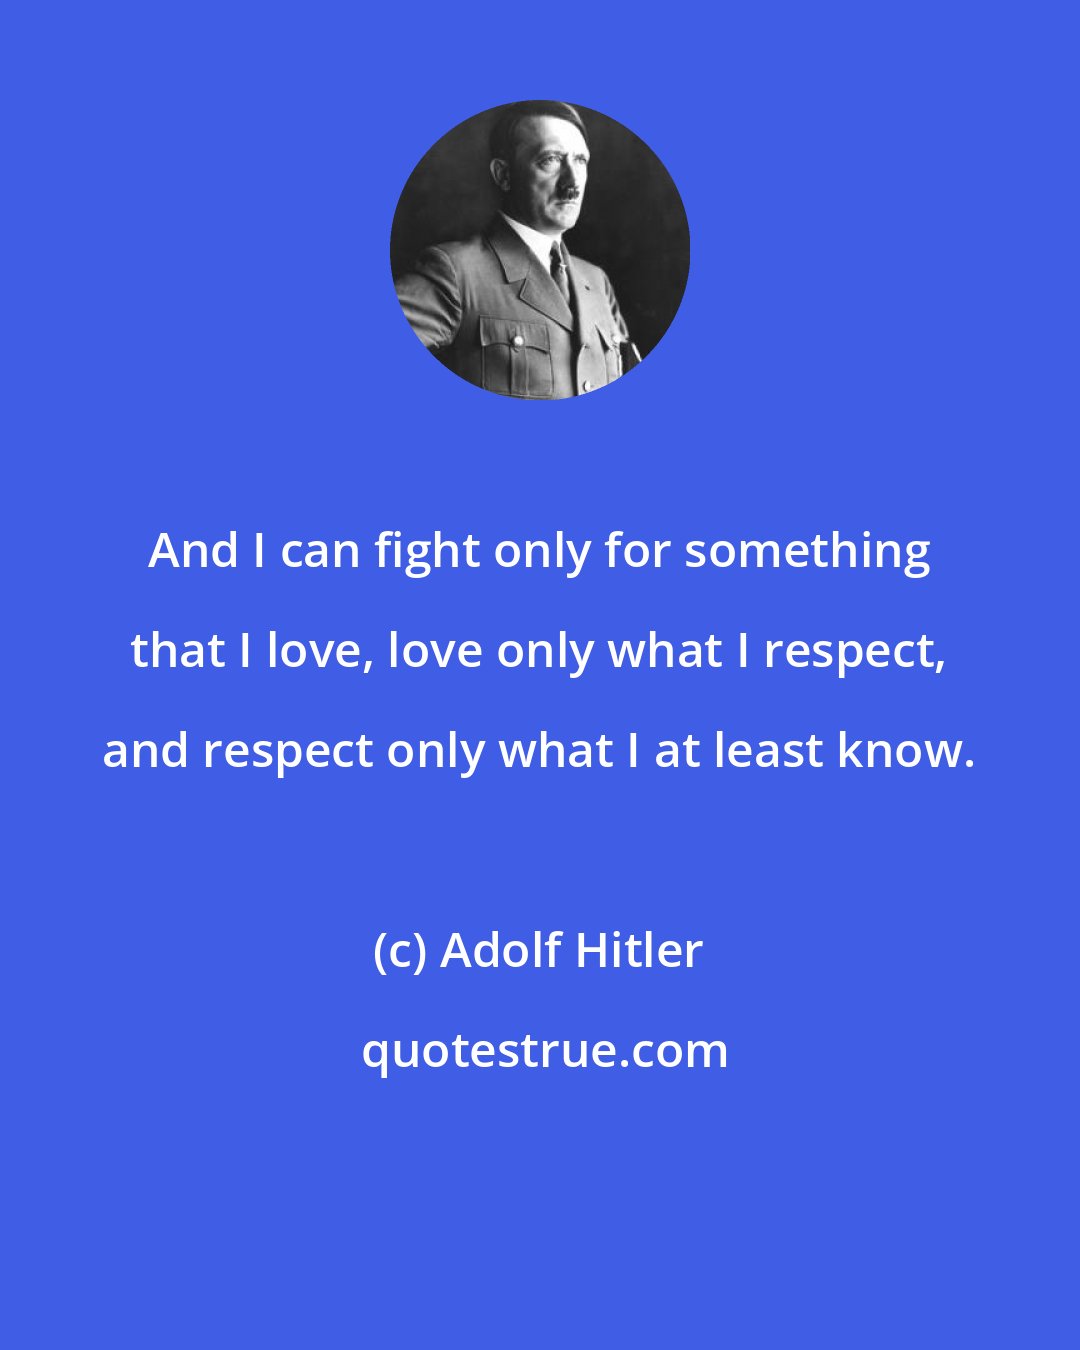 Adolf Hitler: And I can fight only for something that I love, love only what I respect, and respect only what I at least know.